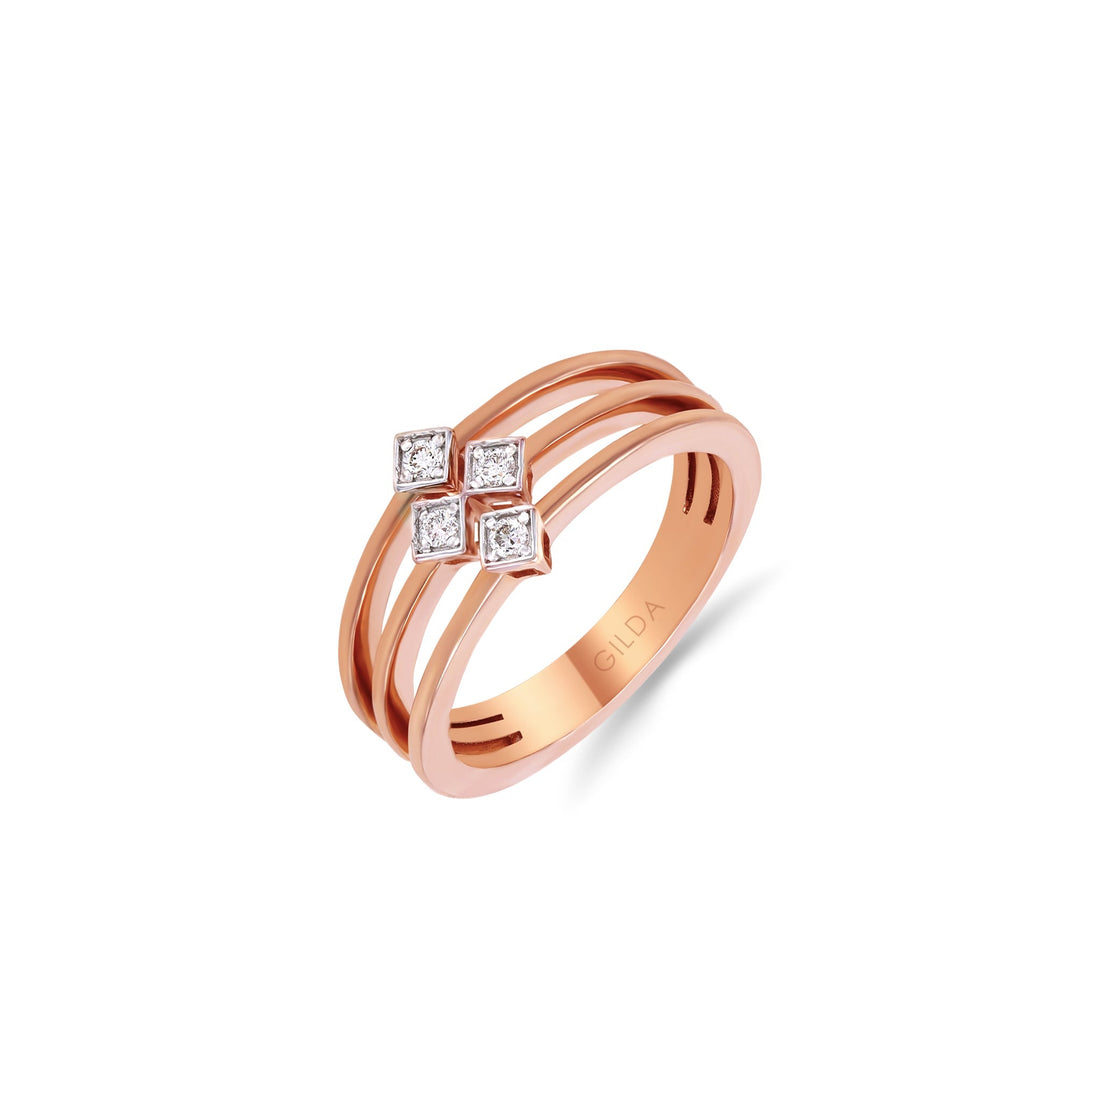 Jewelry Minnies | Diamond Ring | 0.09 Cts. | 14K Gold - Rose / 6 / Diamonds - ring Zengoda Shop online from